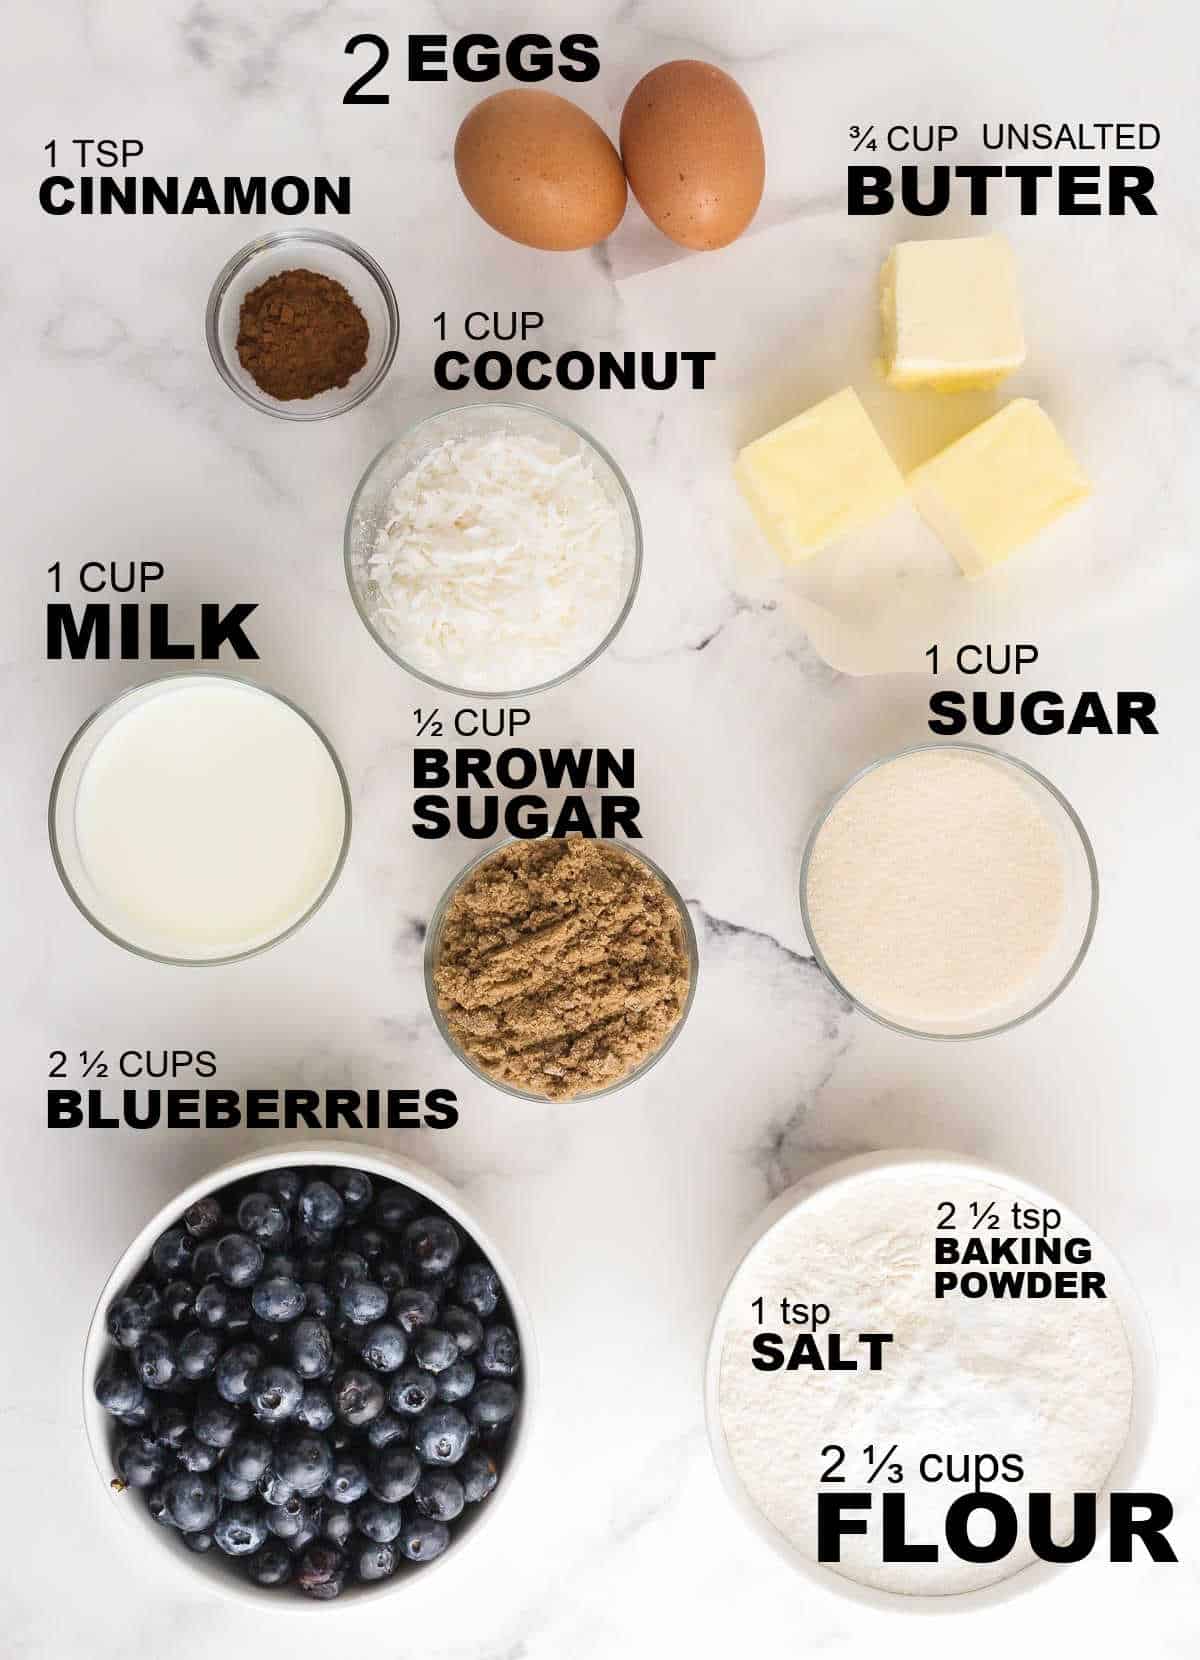 Ingredients need to make a Blueberry Coffee Cake.